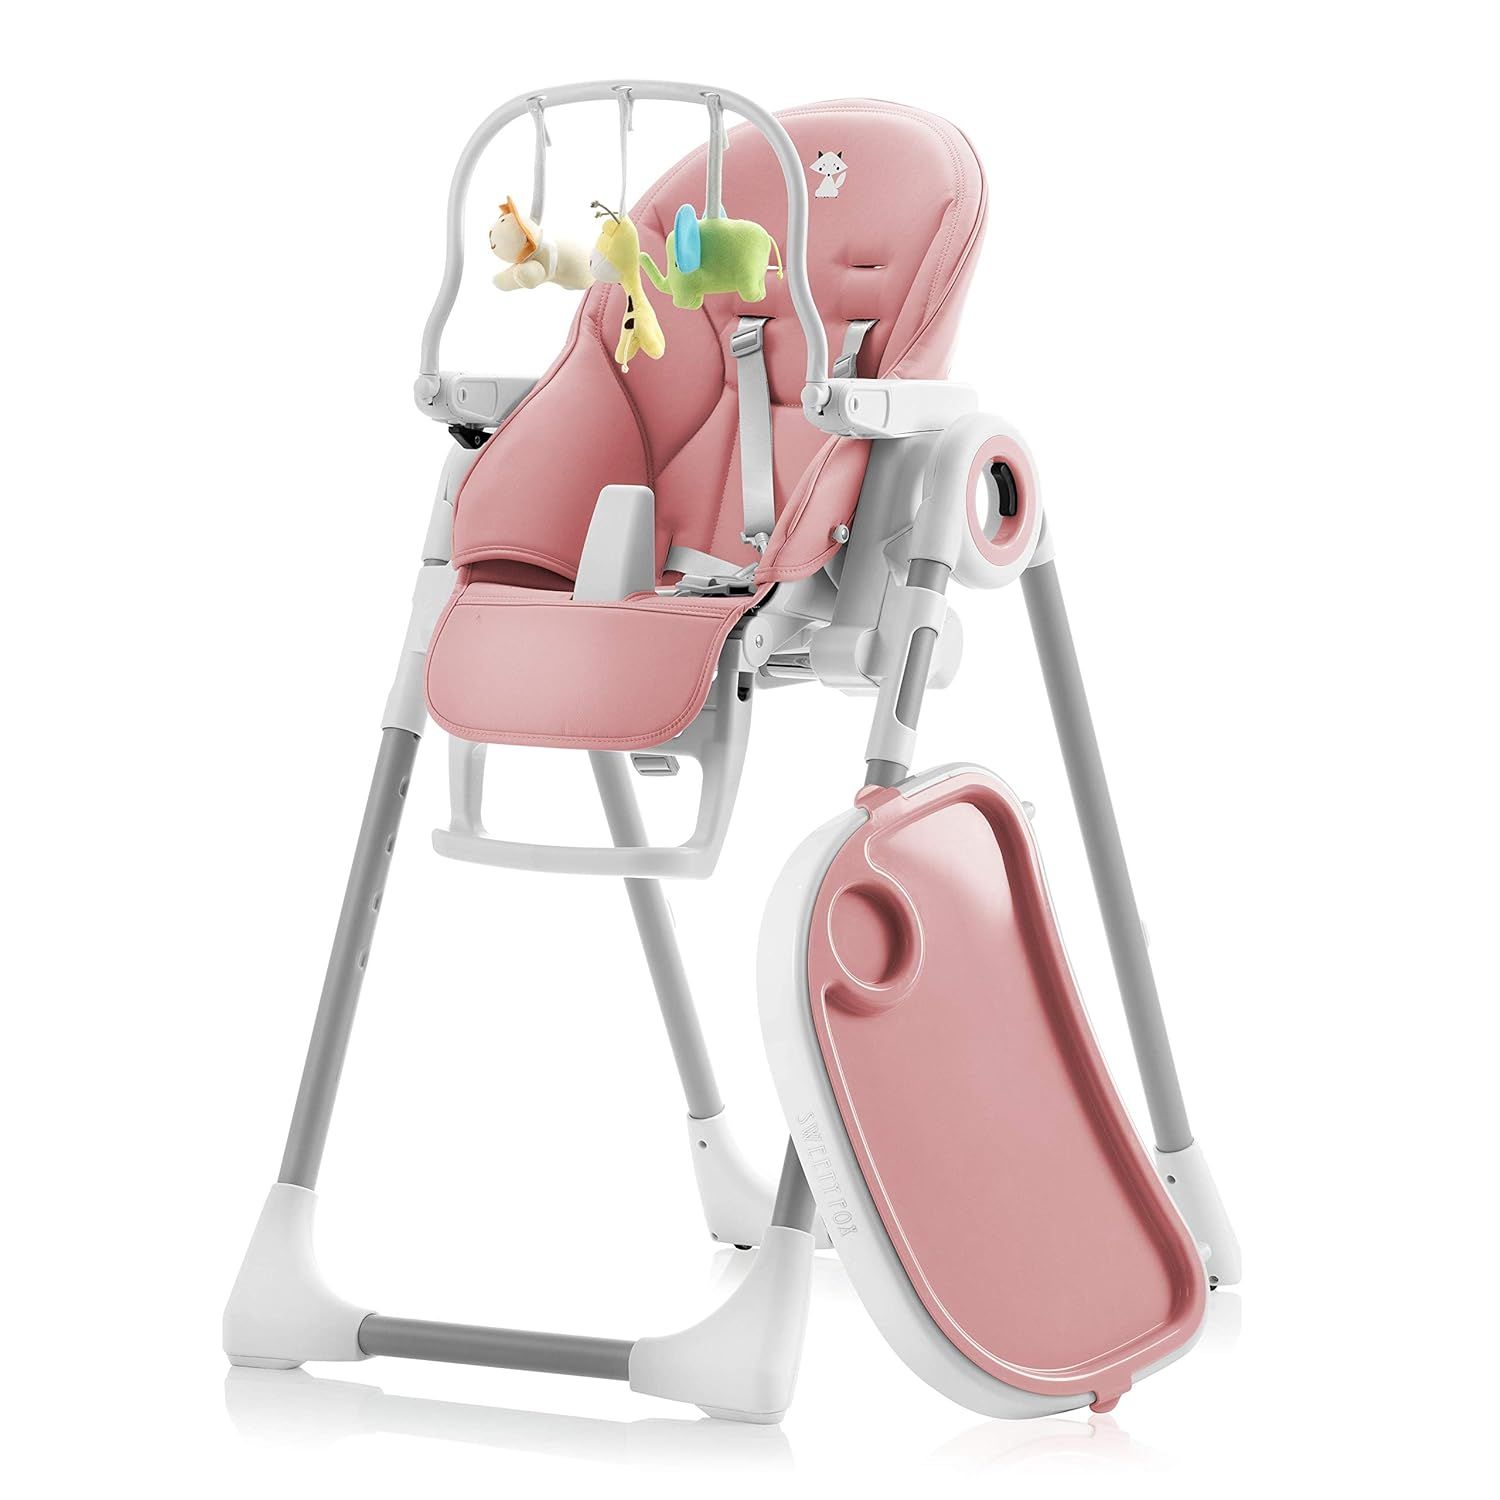 Adjustable, Folding, Baby High Chair - High Chairs for Babies and Toddlers - 7 Different Heights ... | Amazon (US)